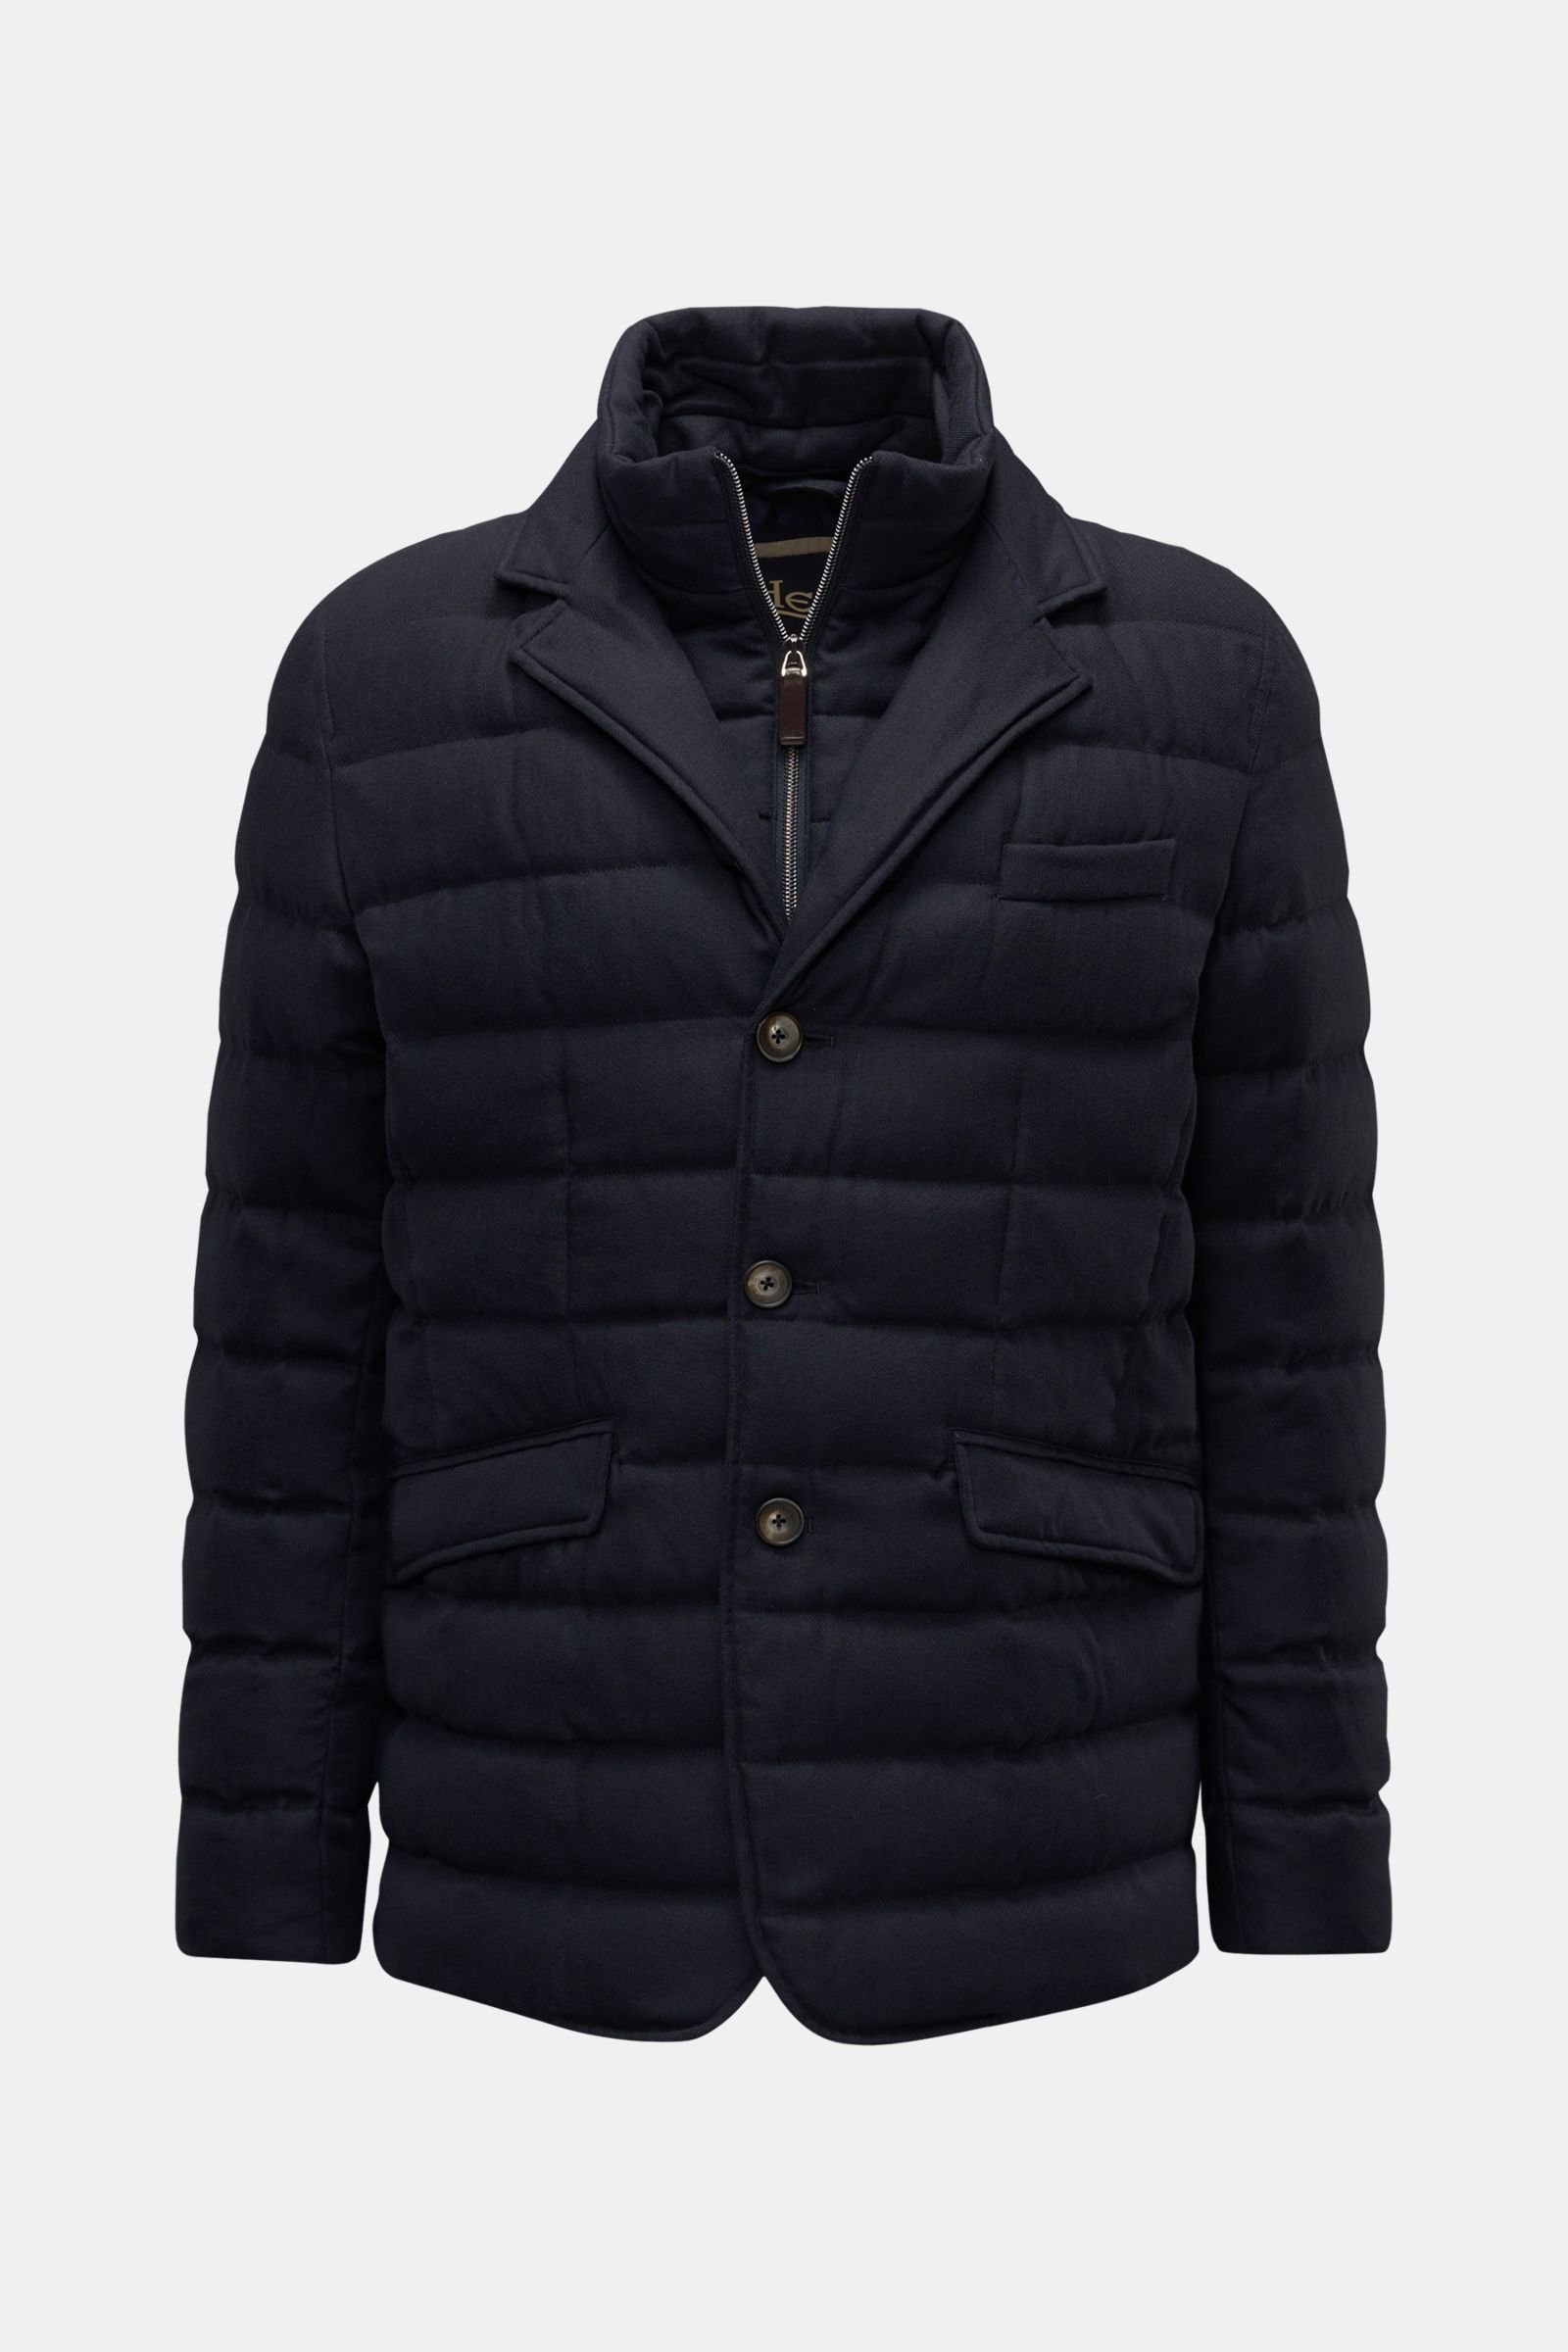 Quilted jacket navy